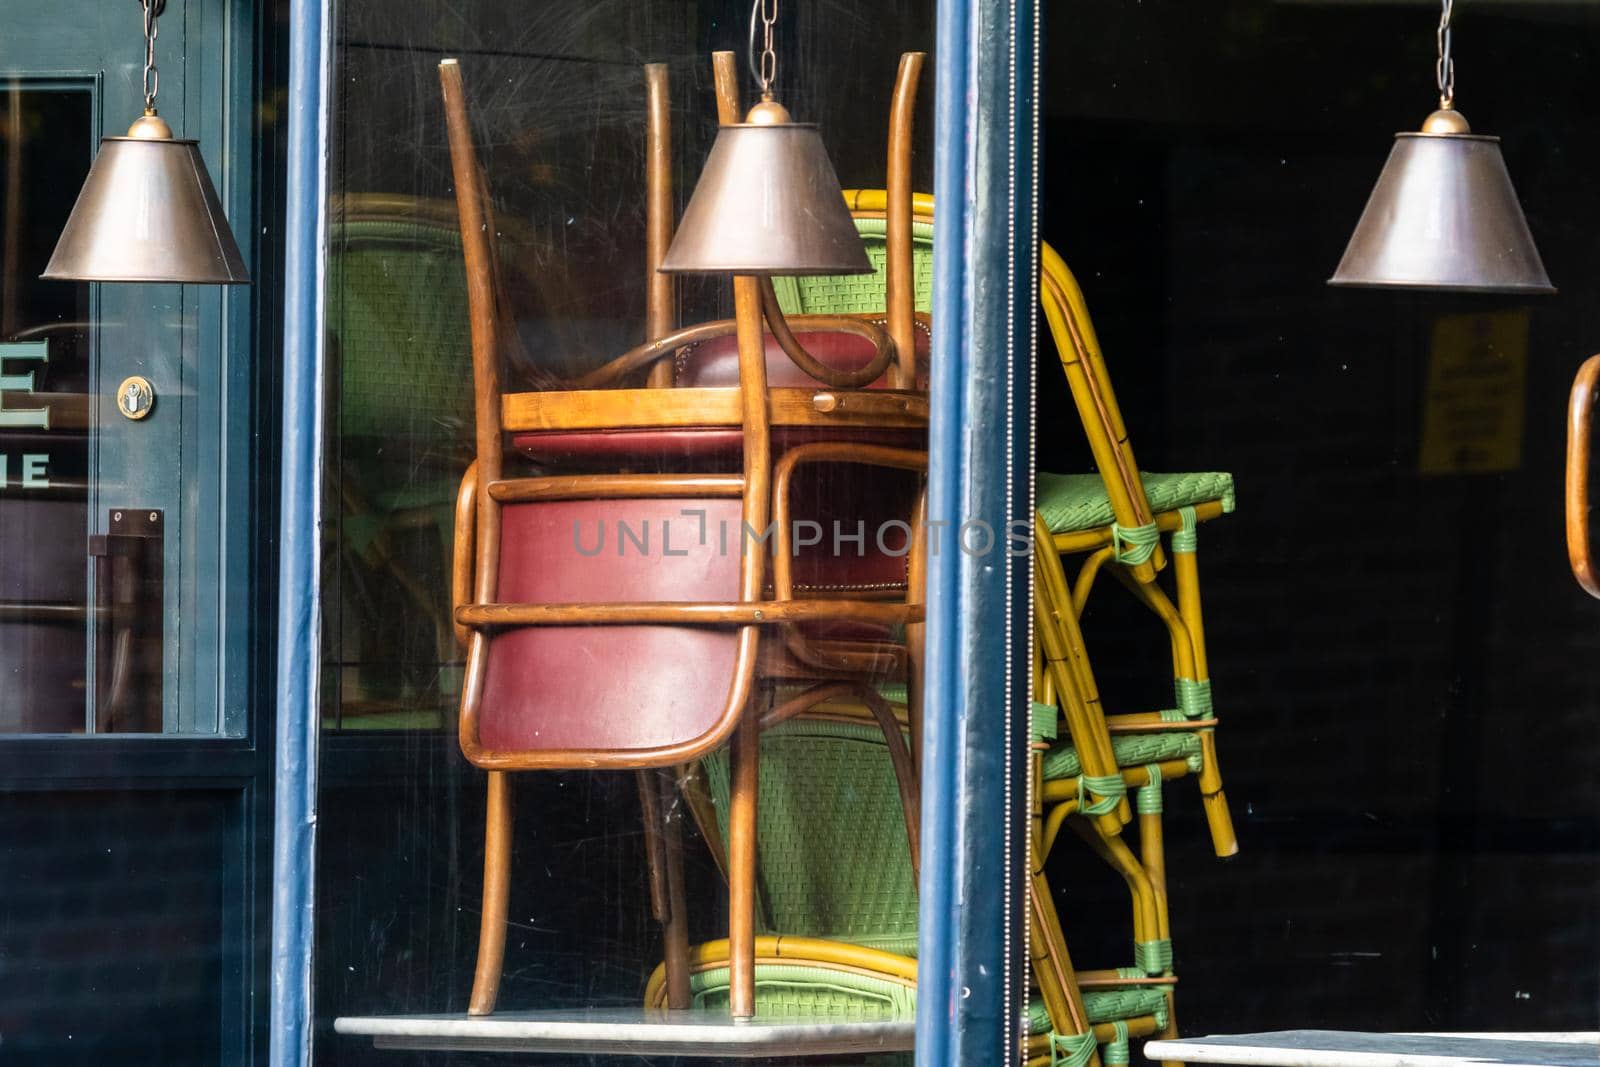 Chairs on the tables of a restaurant forced to close during lockdown to control COVID-19 pandemic, Cambridge, UK